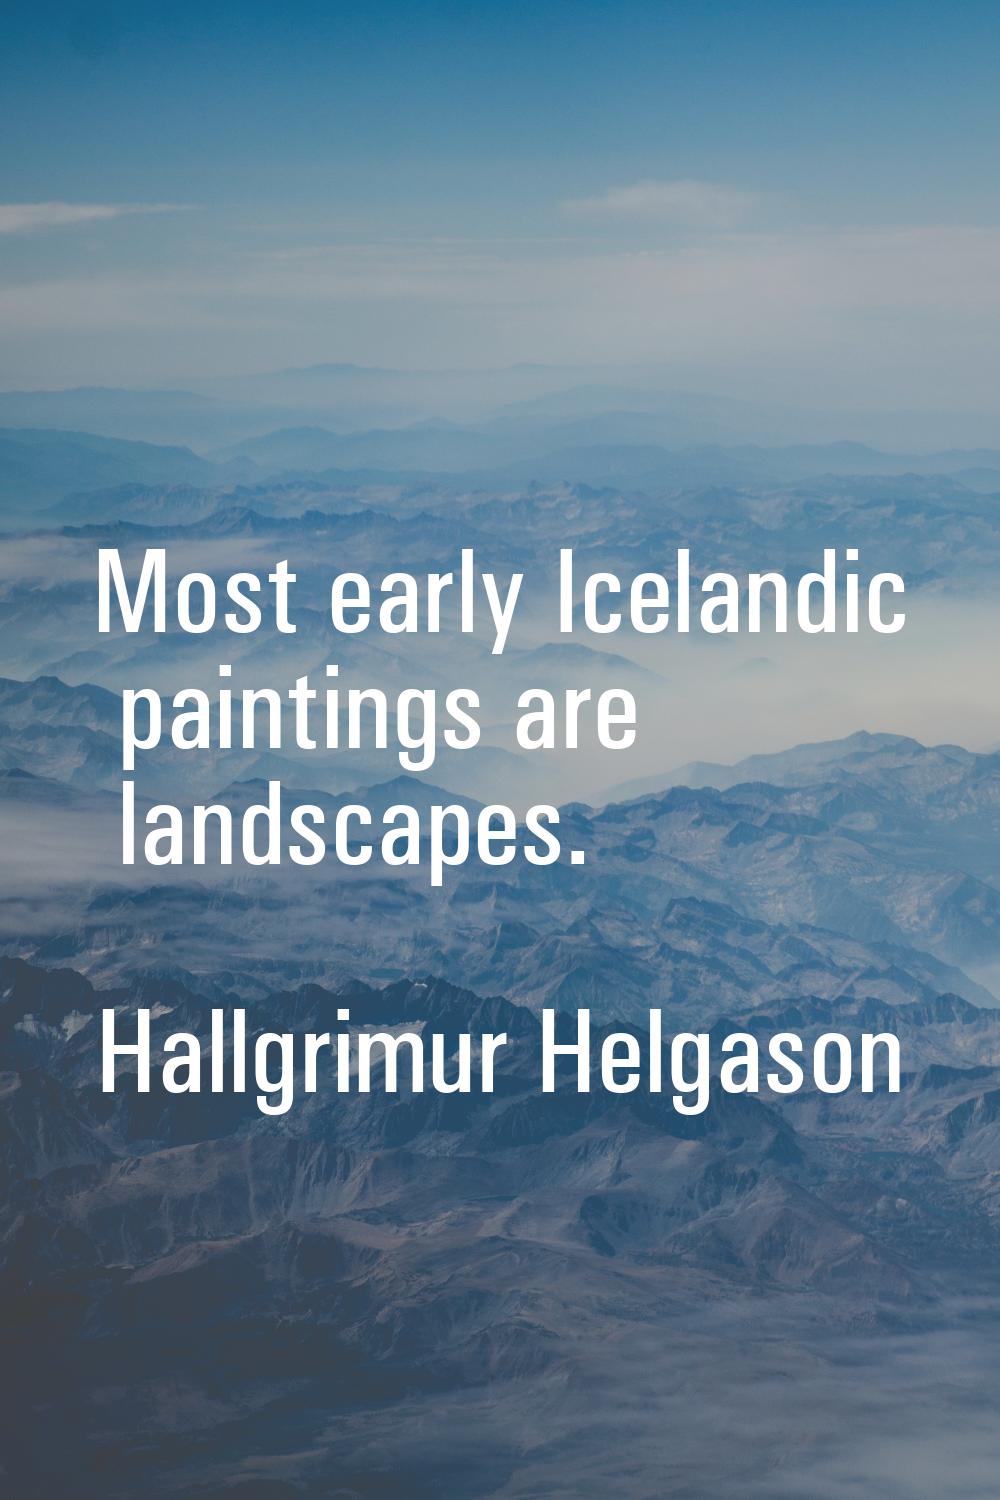 Most early Icelandic paintings are landscapes.